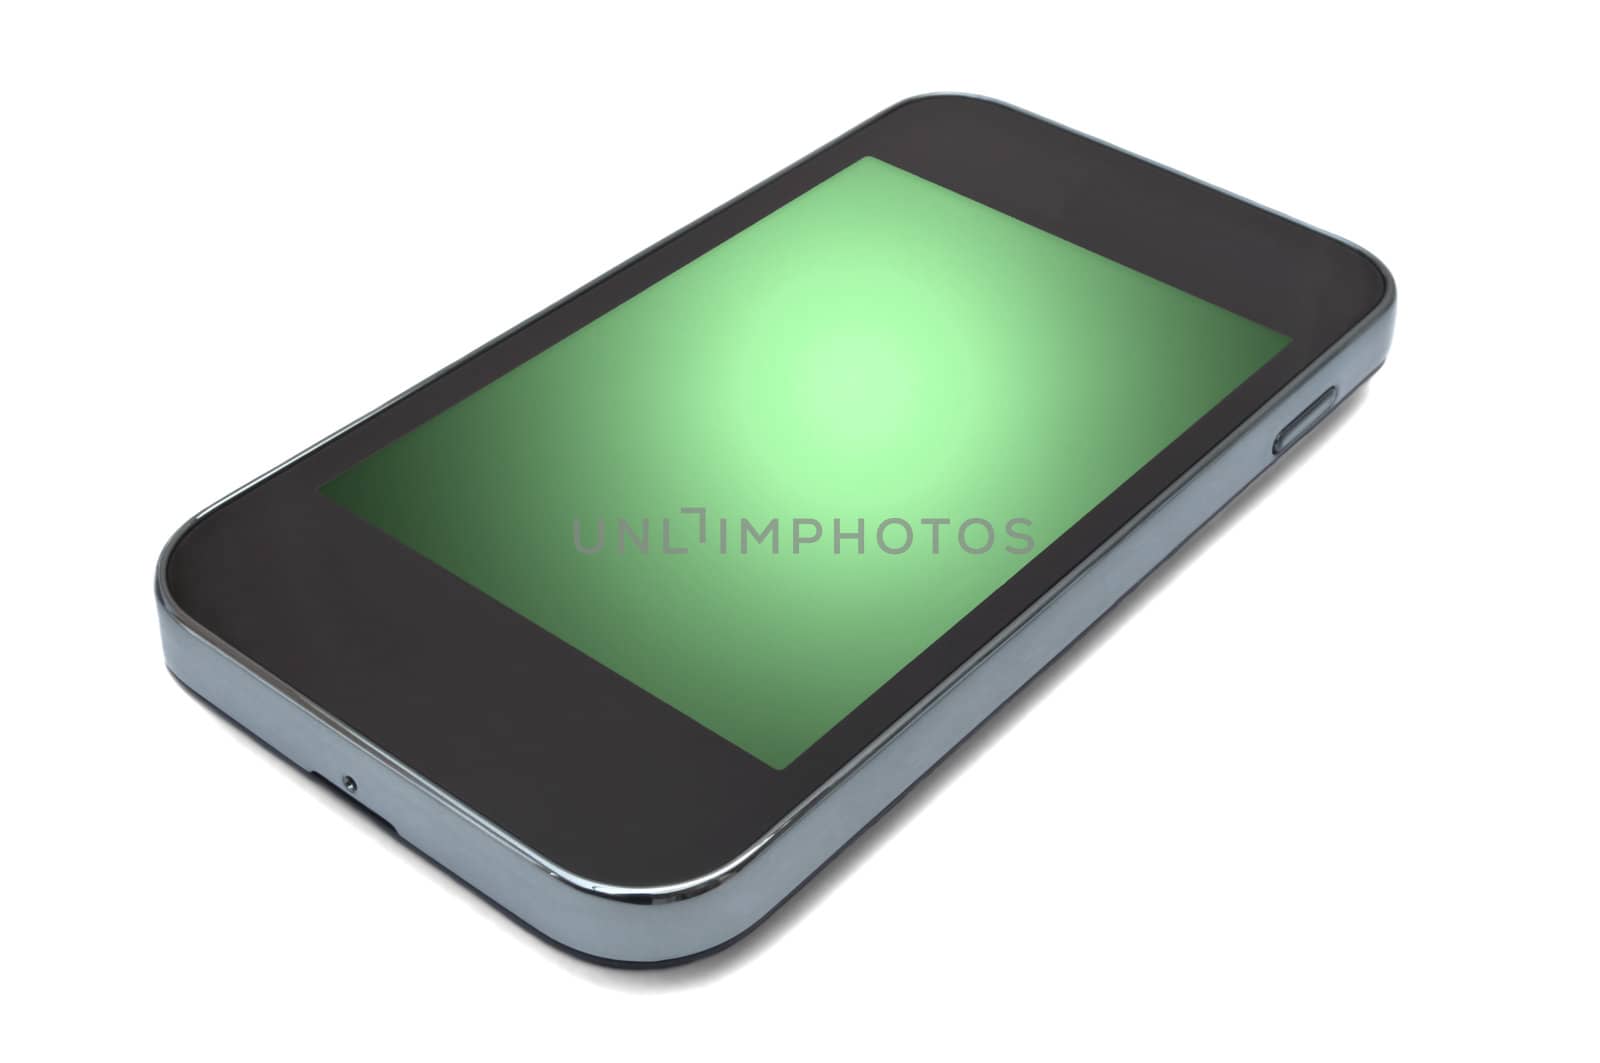 Close and low level capturing a single unbranded smart phone with green screen. White background